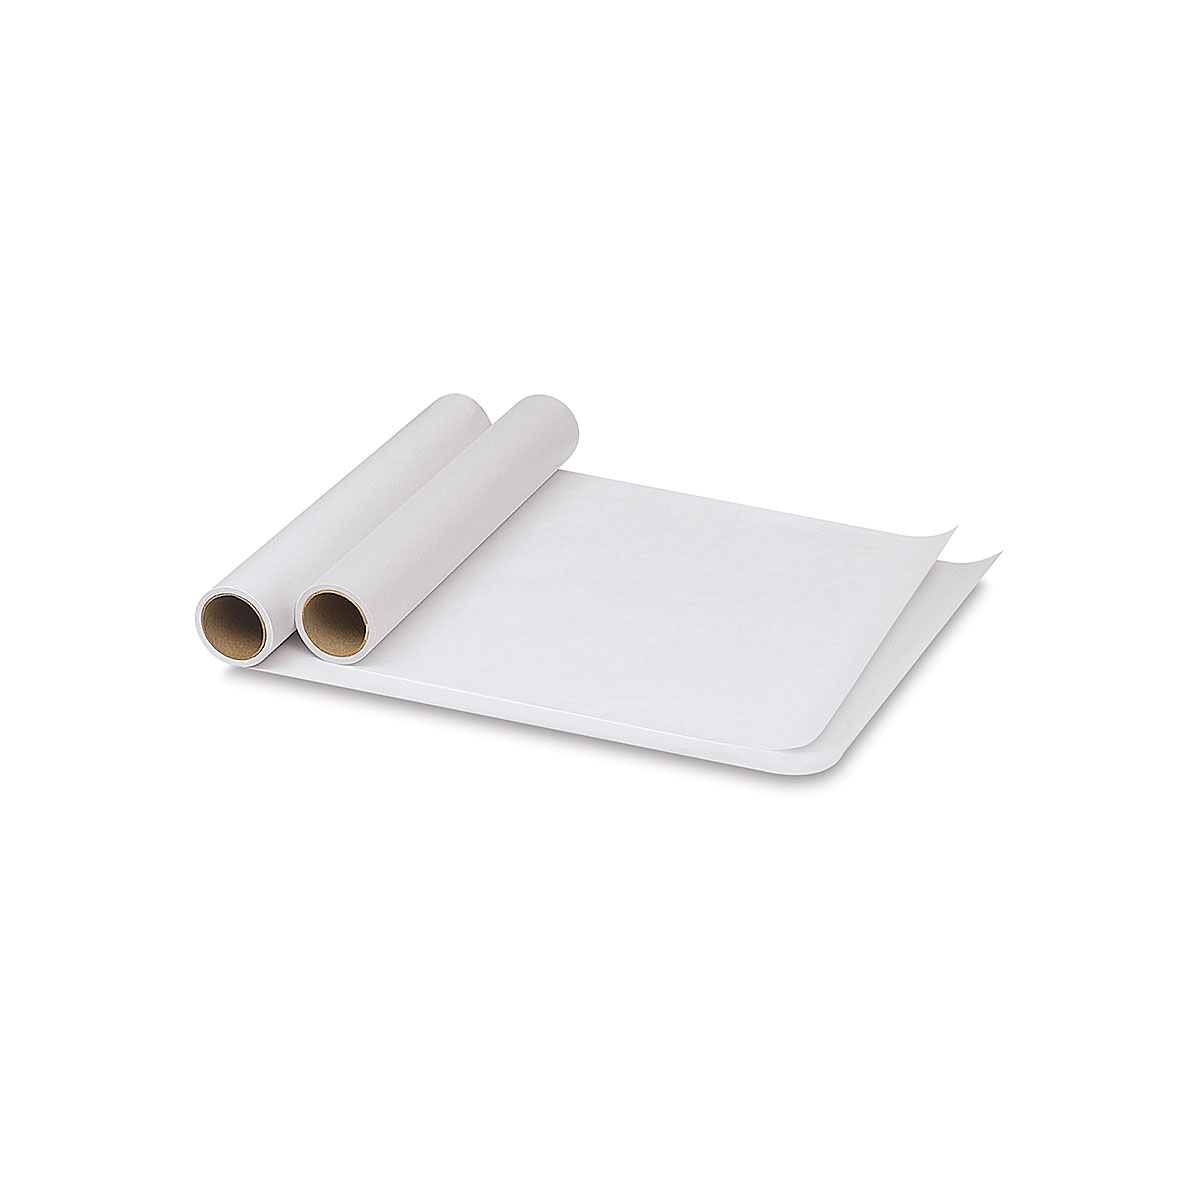 Canson Artist Series Tracing Paper Pads